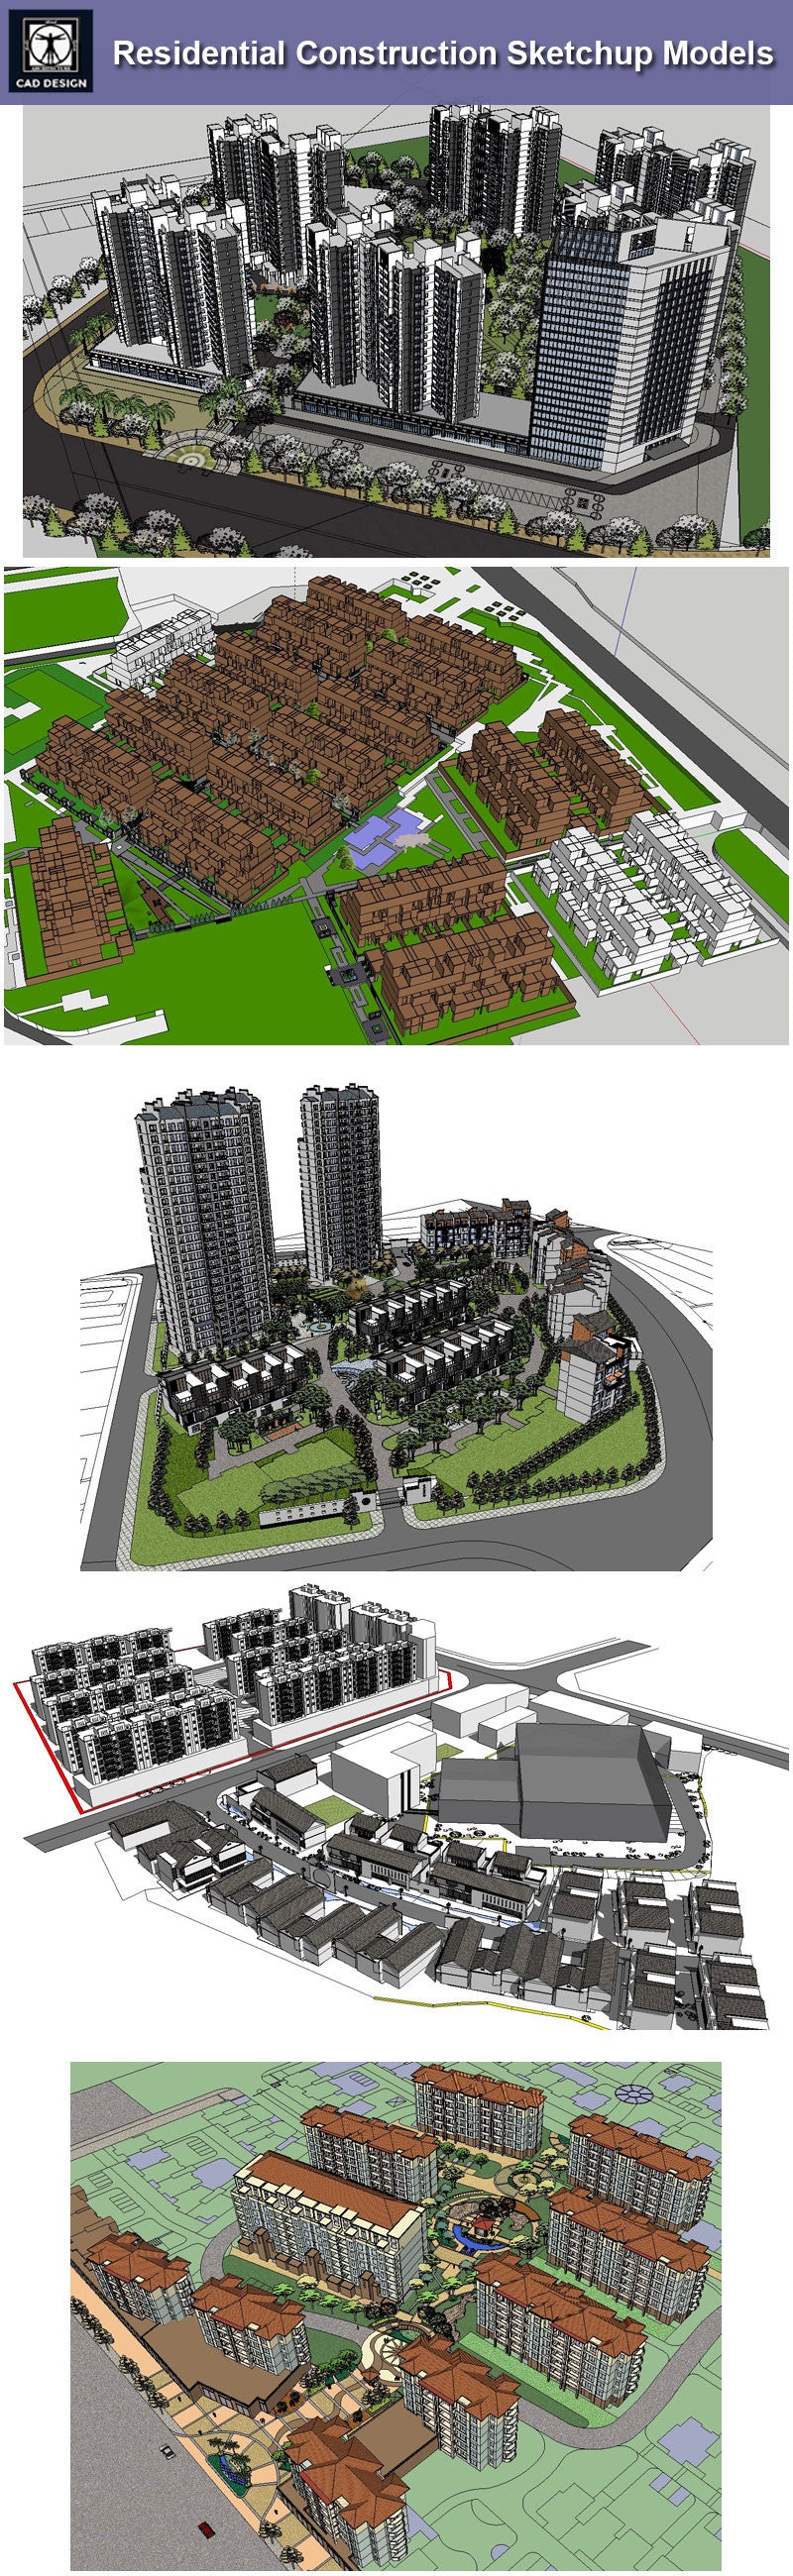 【Download 25 Residential Construction Sketchup 3D Models】 (Recommanded!!)